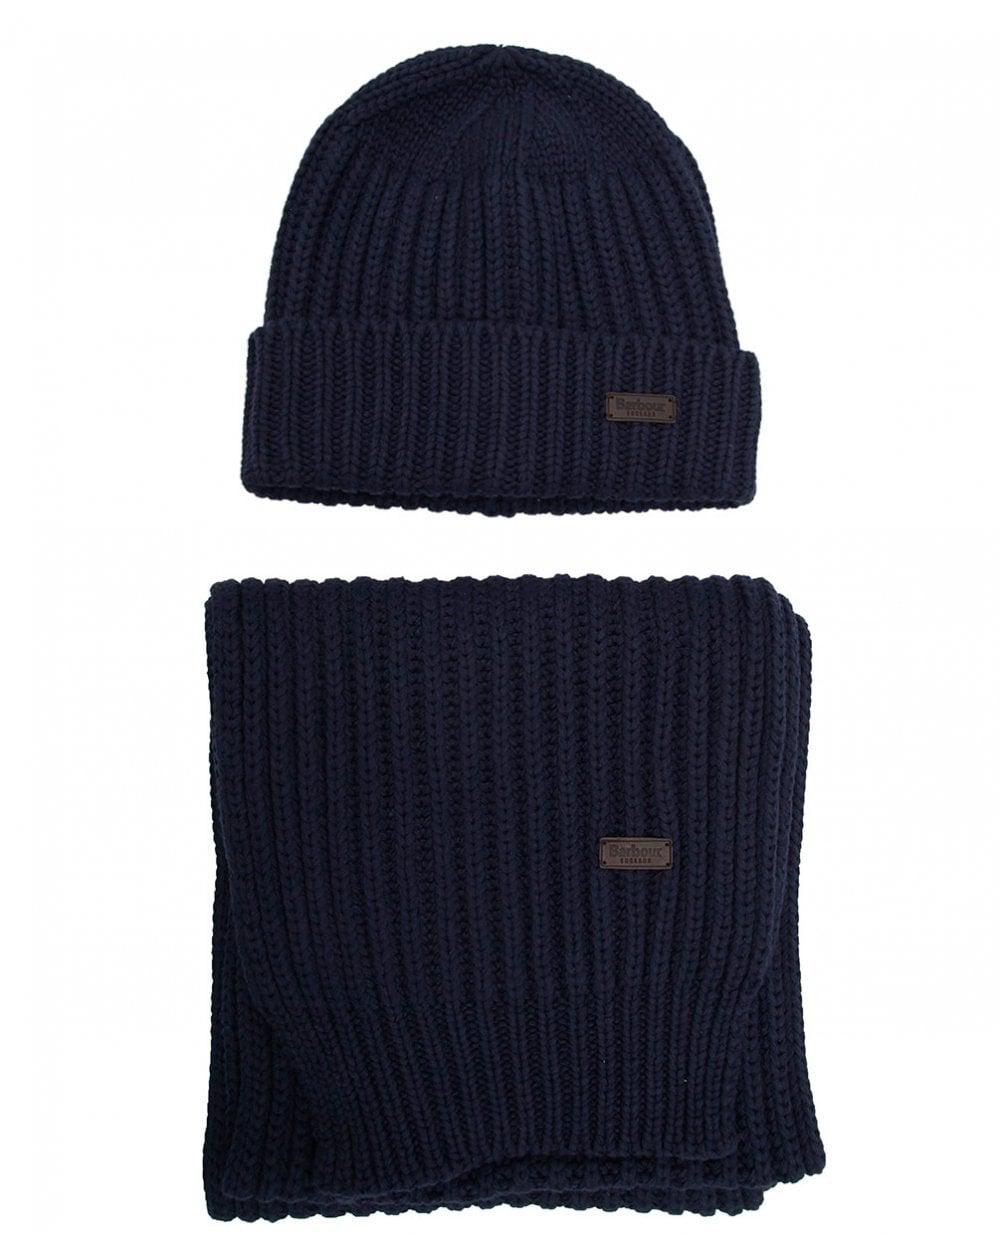 mens barbour hat and scarf set